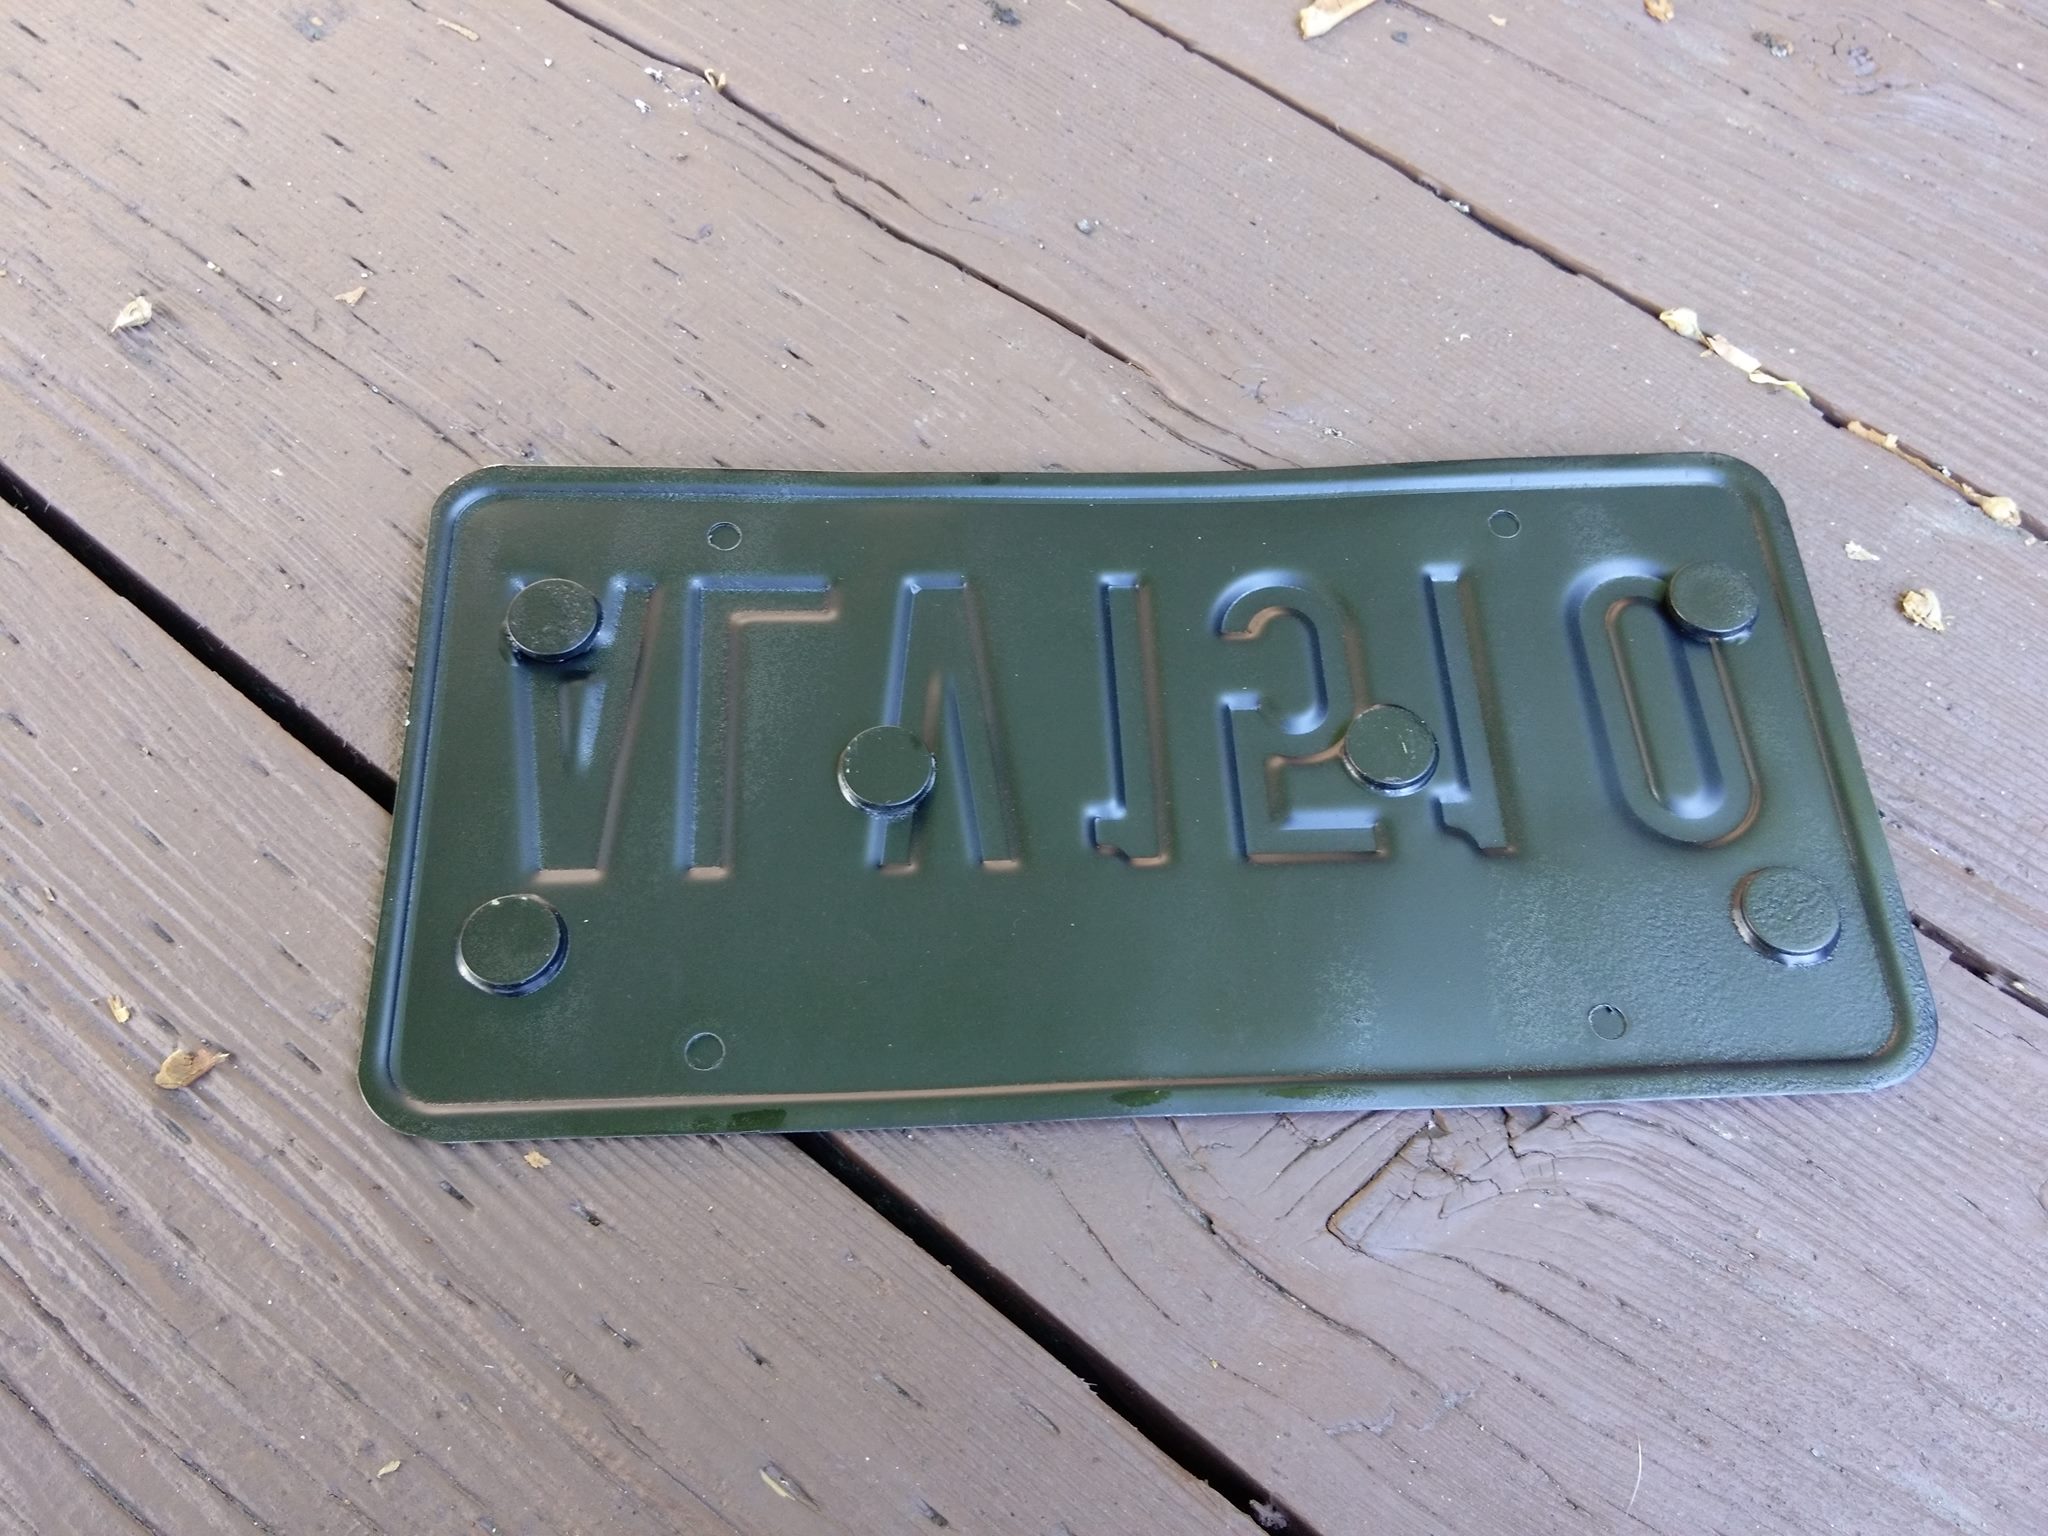 For Shawn Hammer: the back of the front license plate (and how it sit